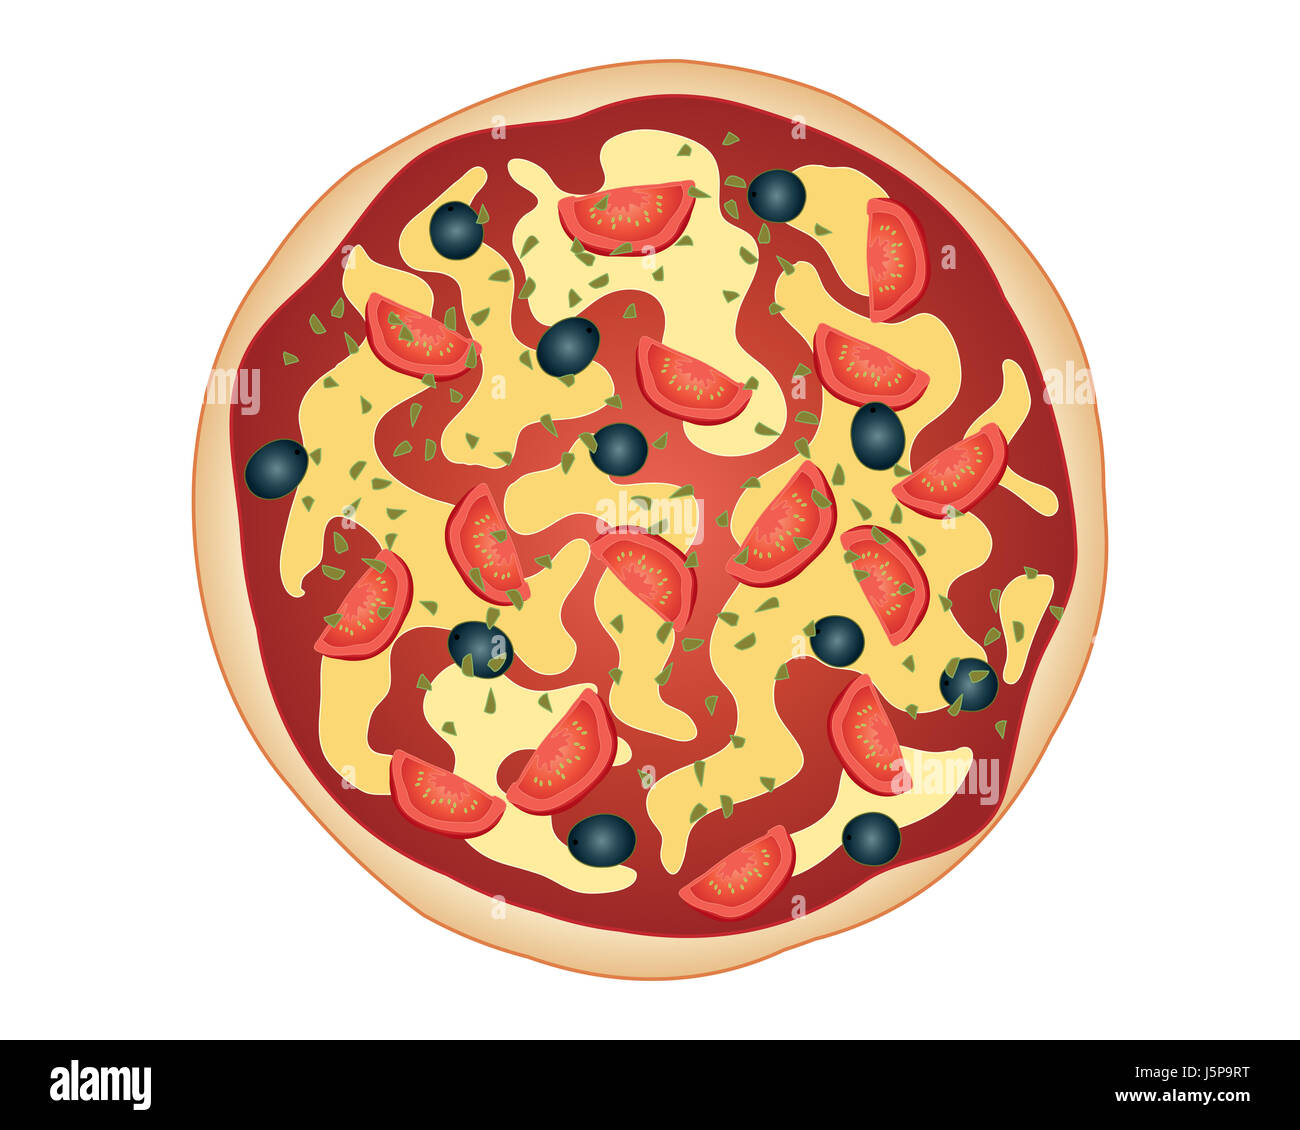 an illustration of classic cheese and tomato pizza with black olives bread base tomato sauce cheese  tomato pieces and sprinkled with herbs Stock Photo